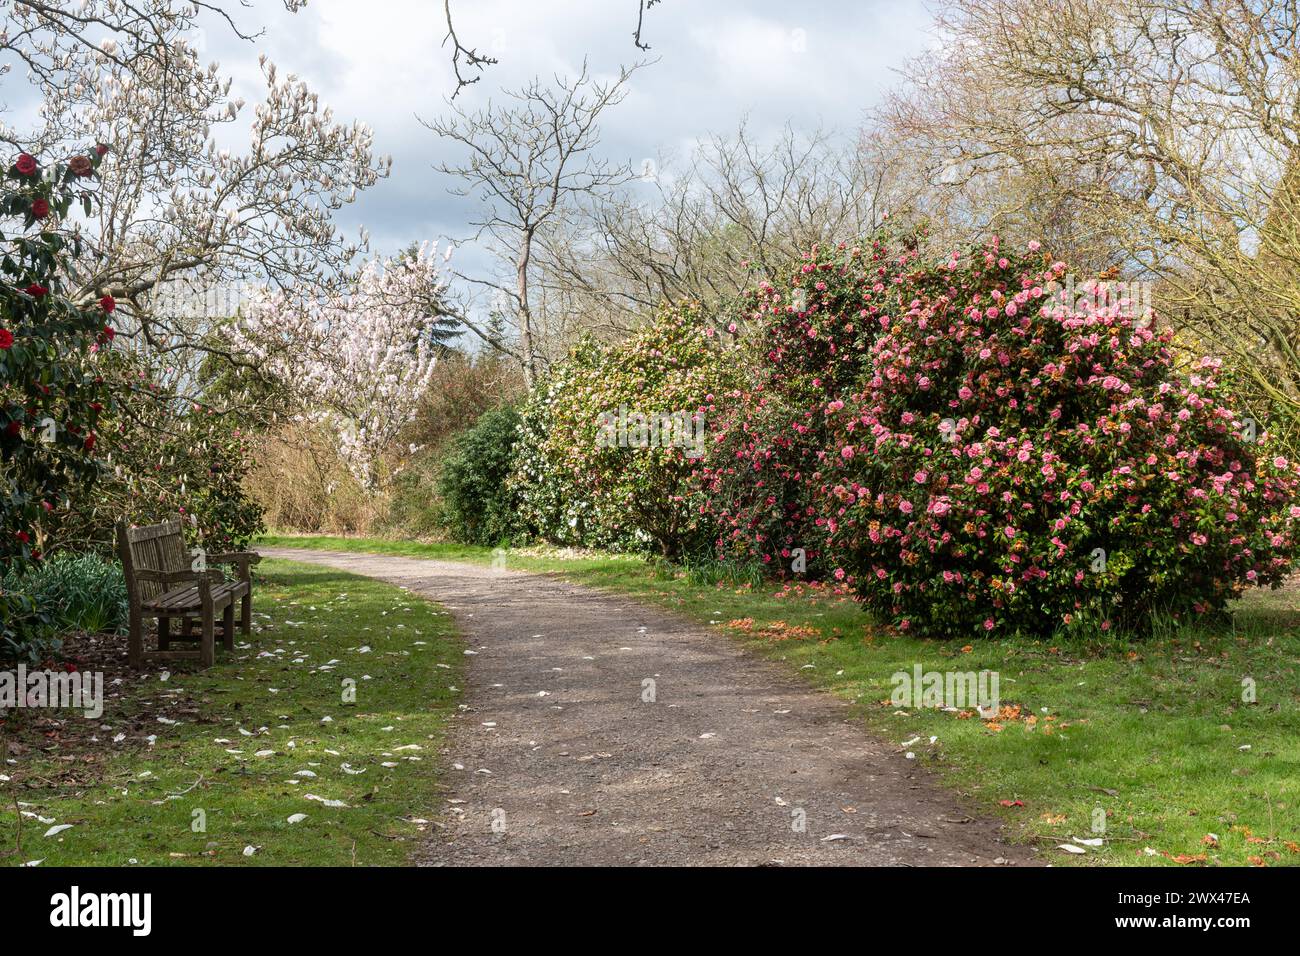 Spring flowering shrubs and trees at Sir Harold Hillier Gardens, including magnolias and camellias during March, Hampshire, England, UK Stock Photo